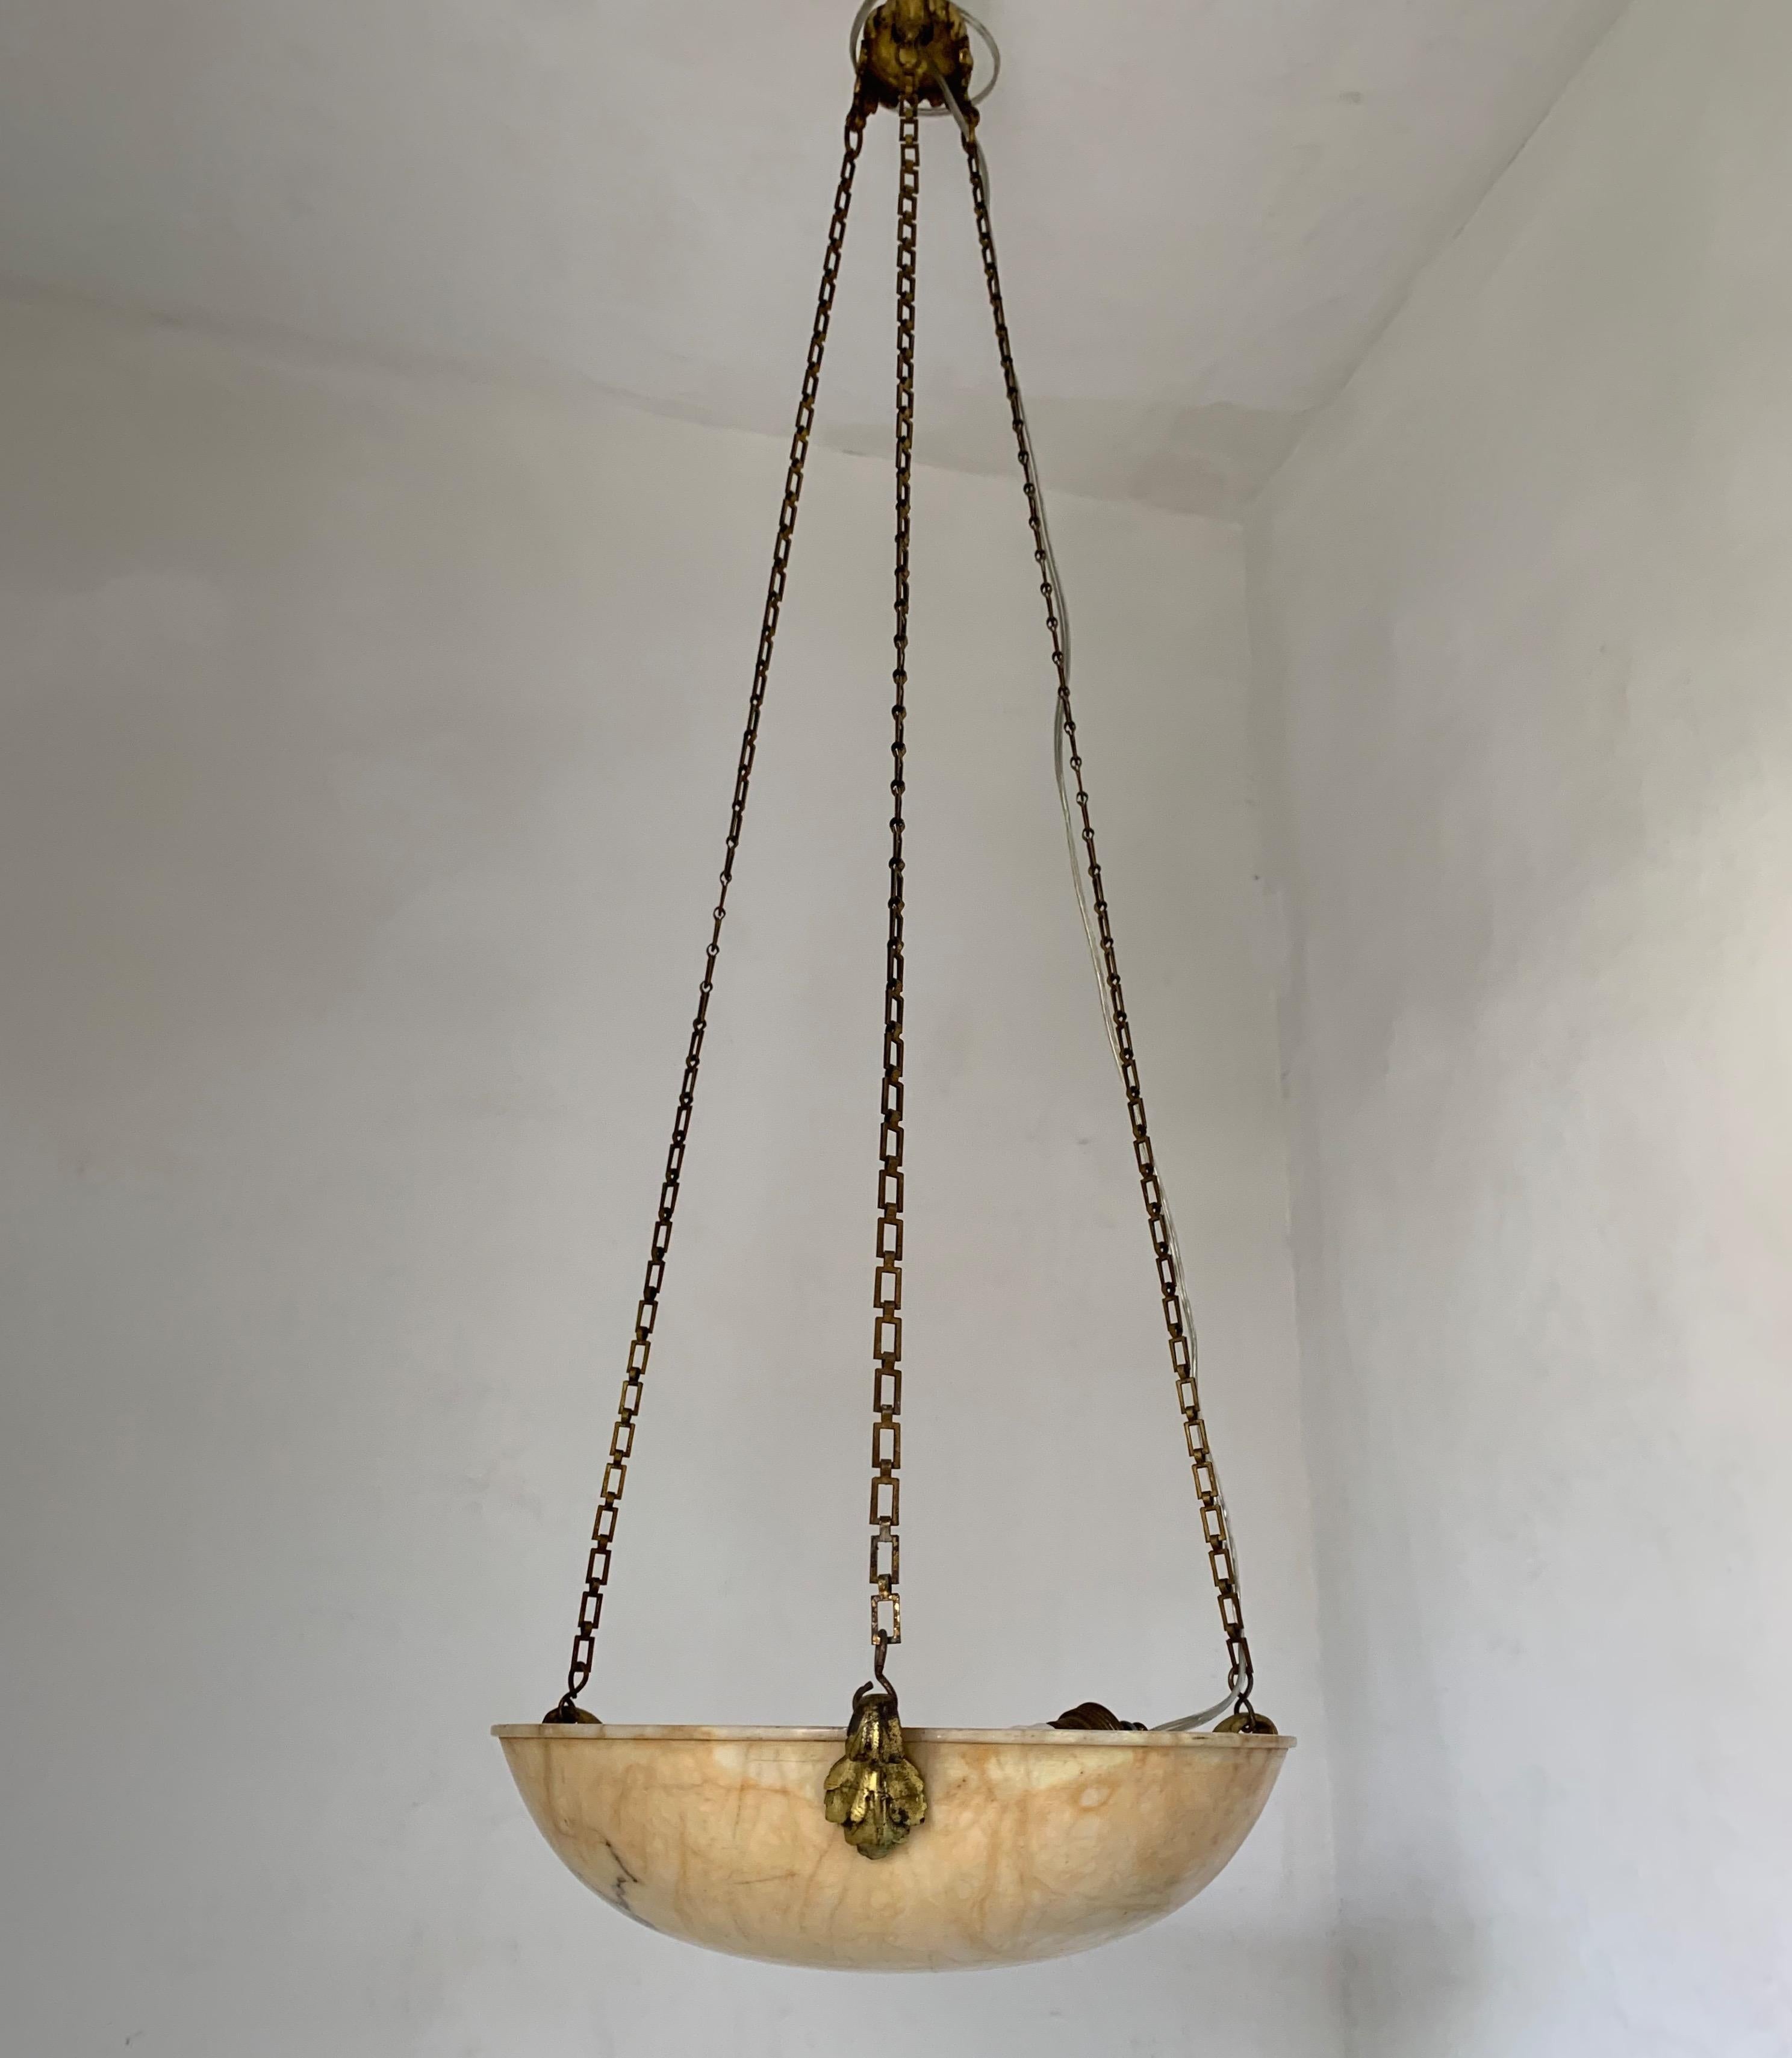 Neoclassical Revival Petit Amber Color Antique Alabaster Pendant Light Chandelier with Bronze Hanging